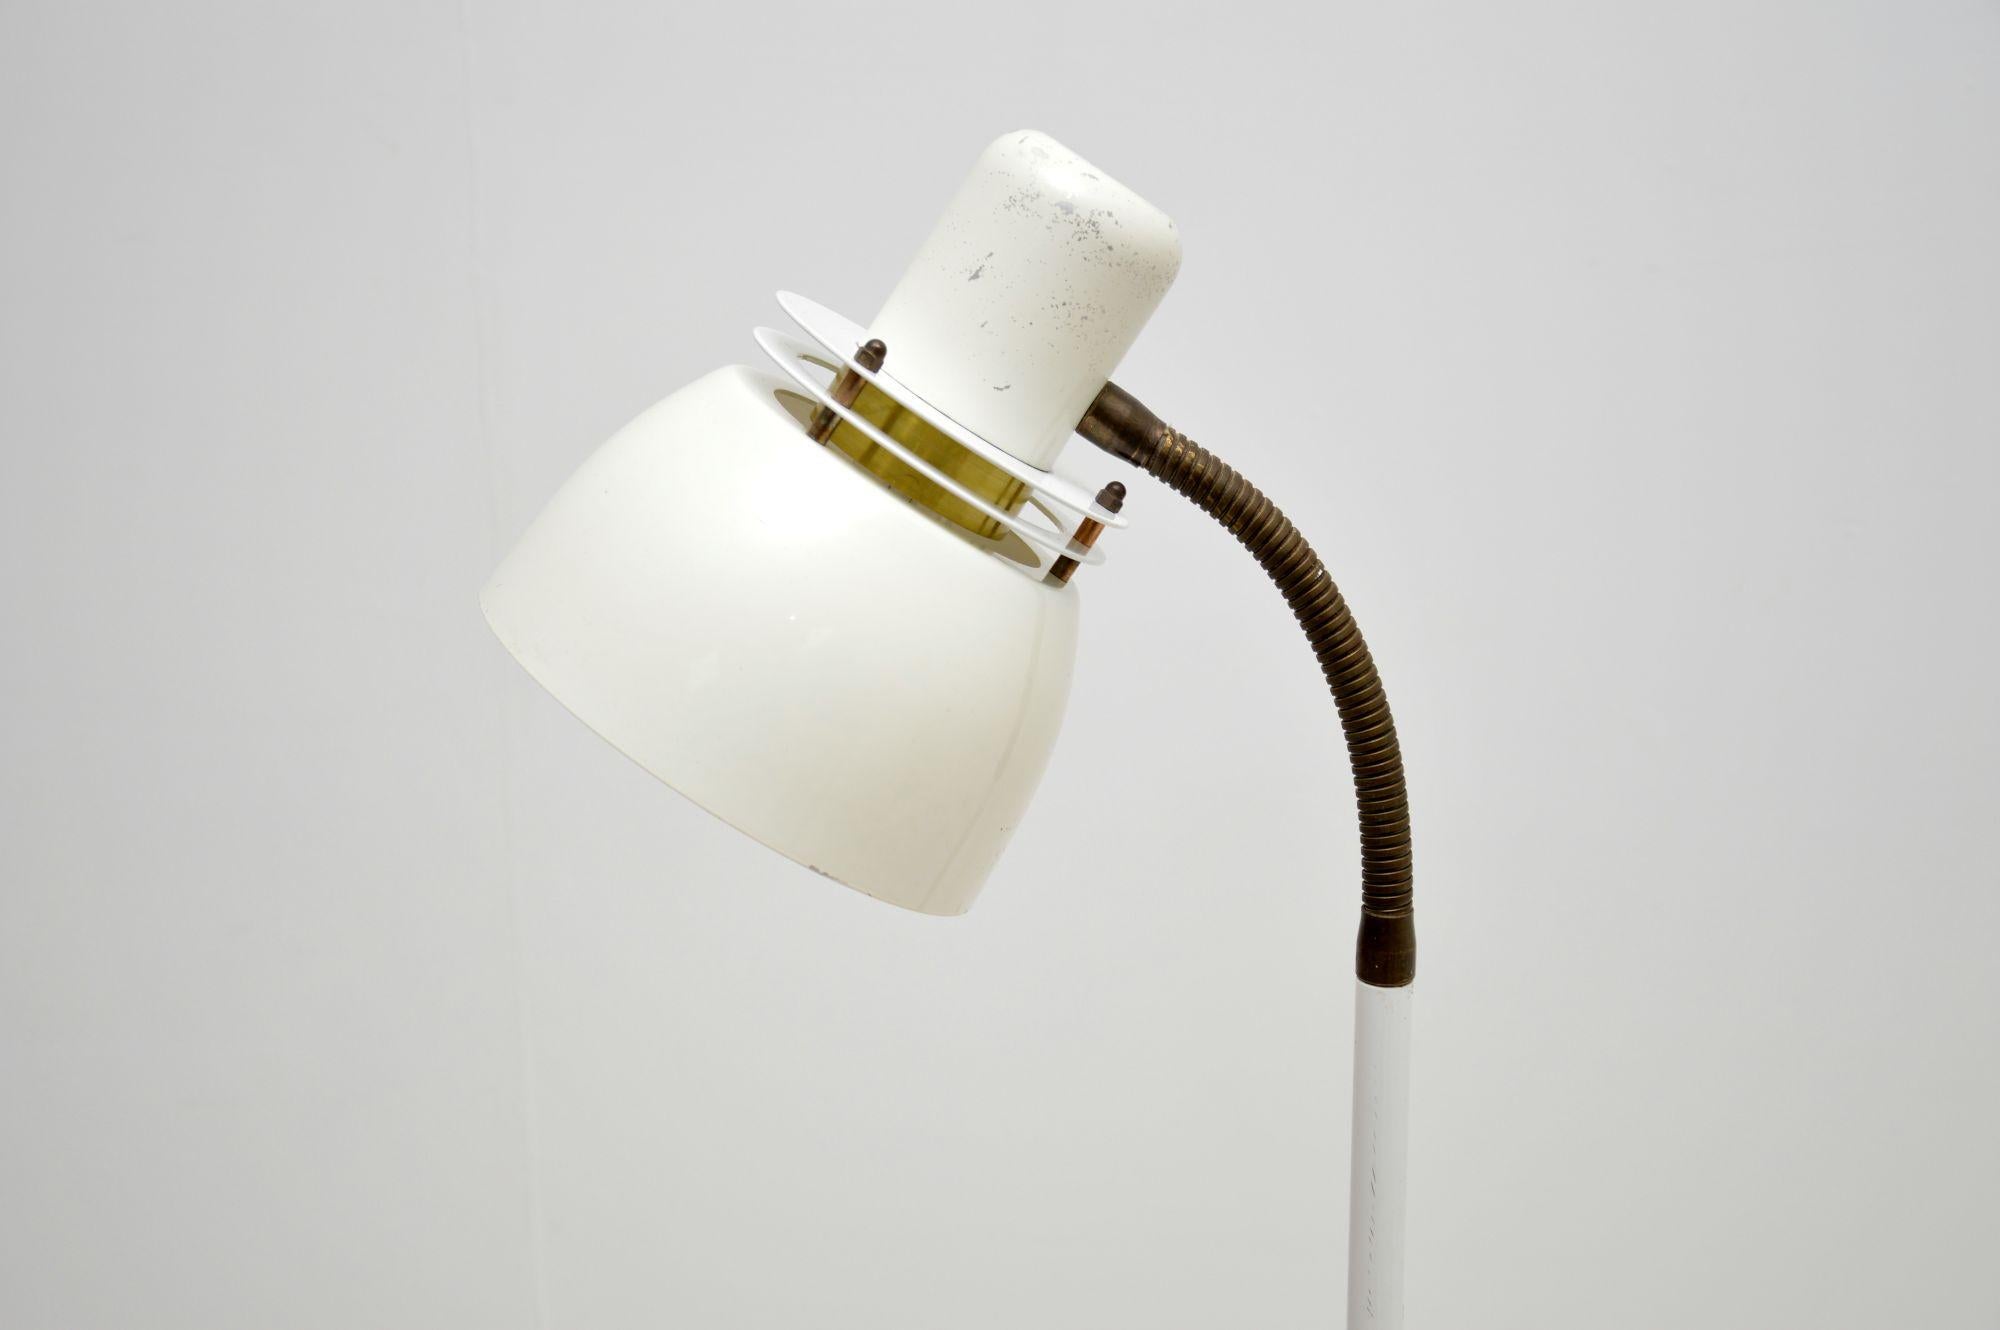 A stylish and extremely well made vintage swedish floor lamp by Belid. This was made in Sweden, it dates from around the 1970-80’s.

The quality is superb, this is beautifully designed and is a useful size. The lamp is finished in white, with a